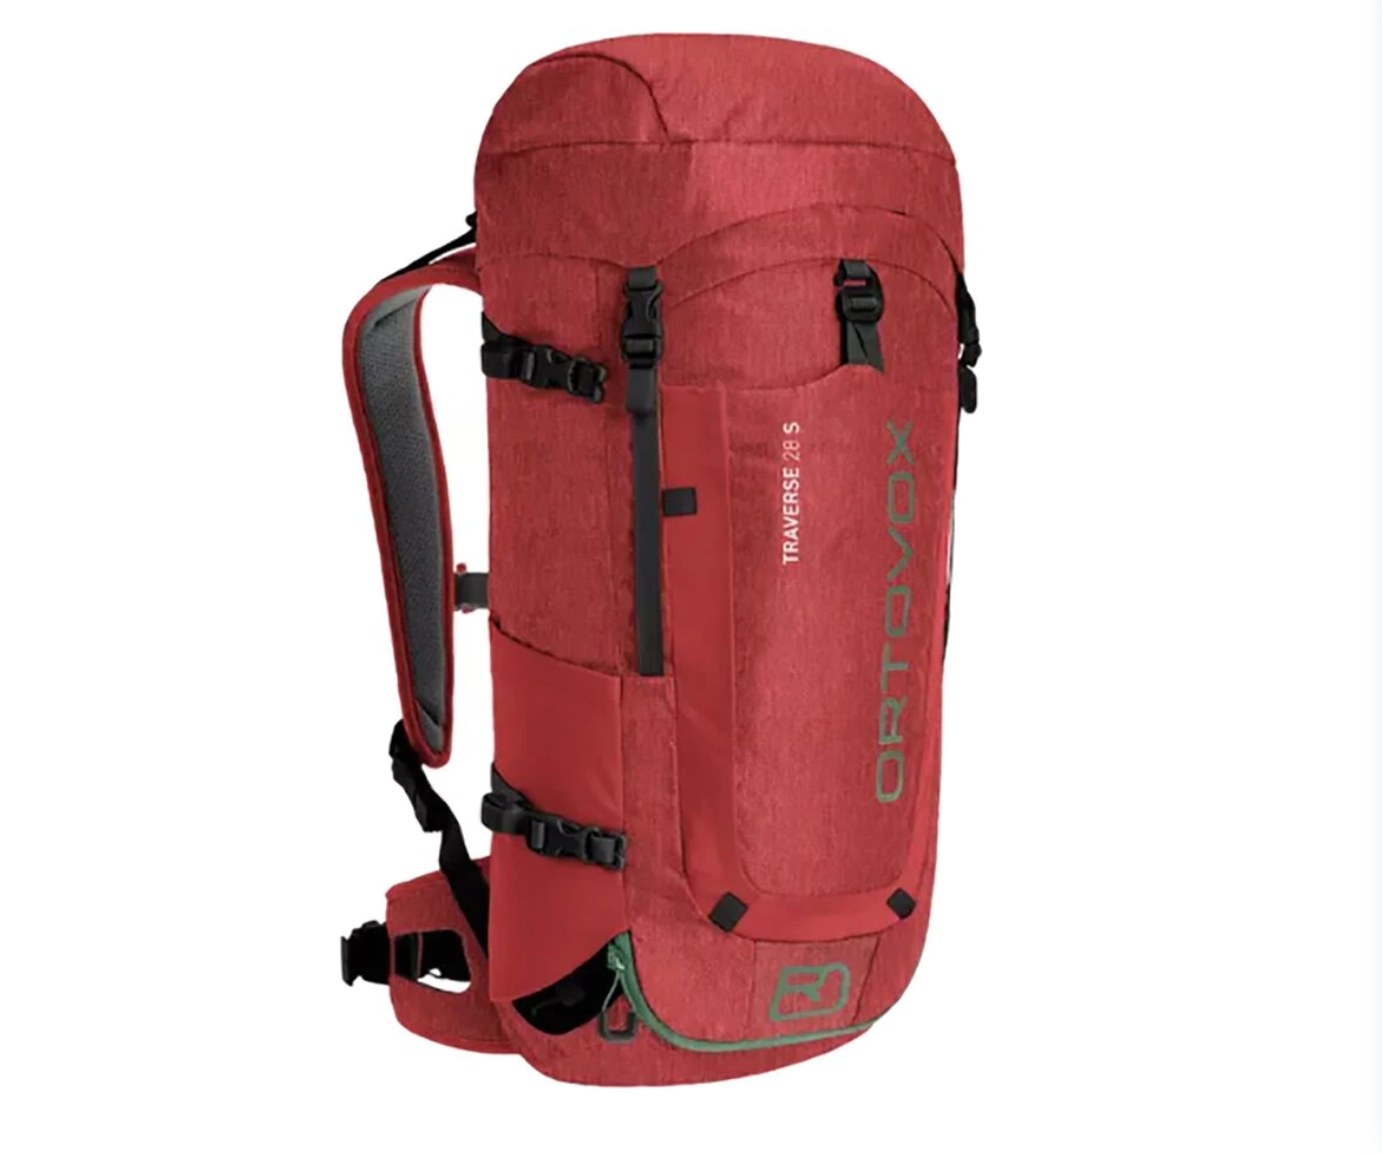 the Ortovox traverse pack